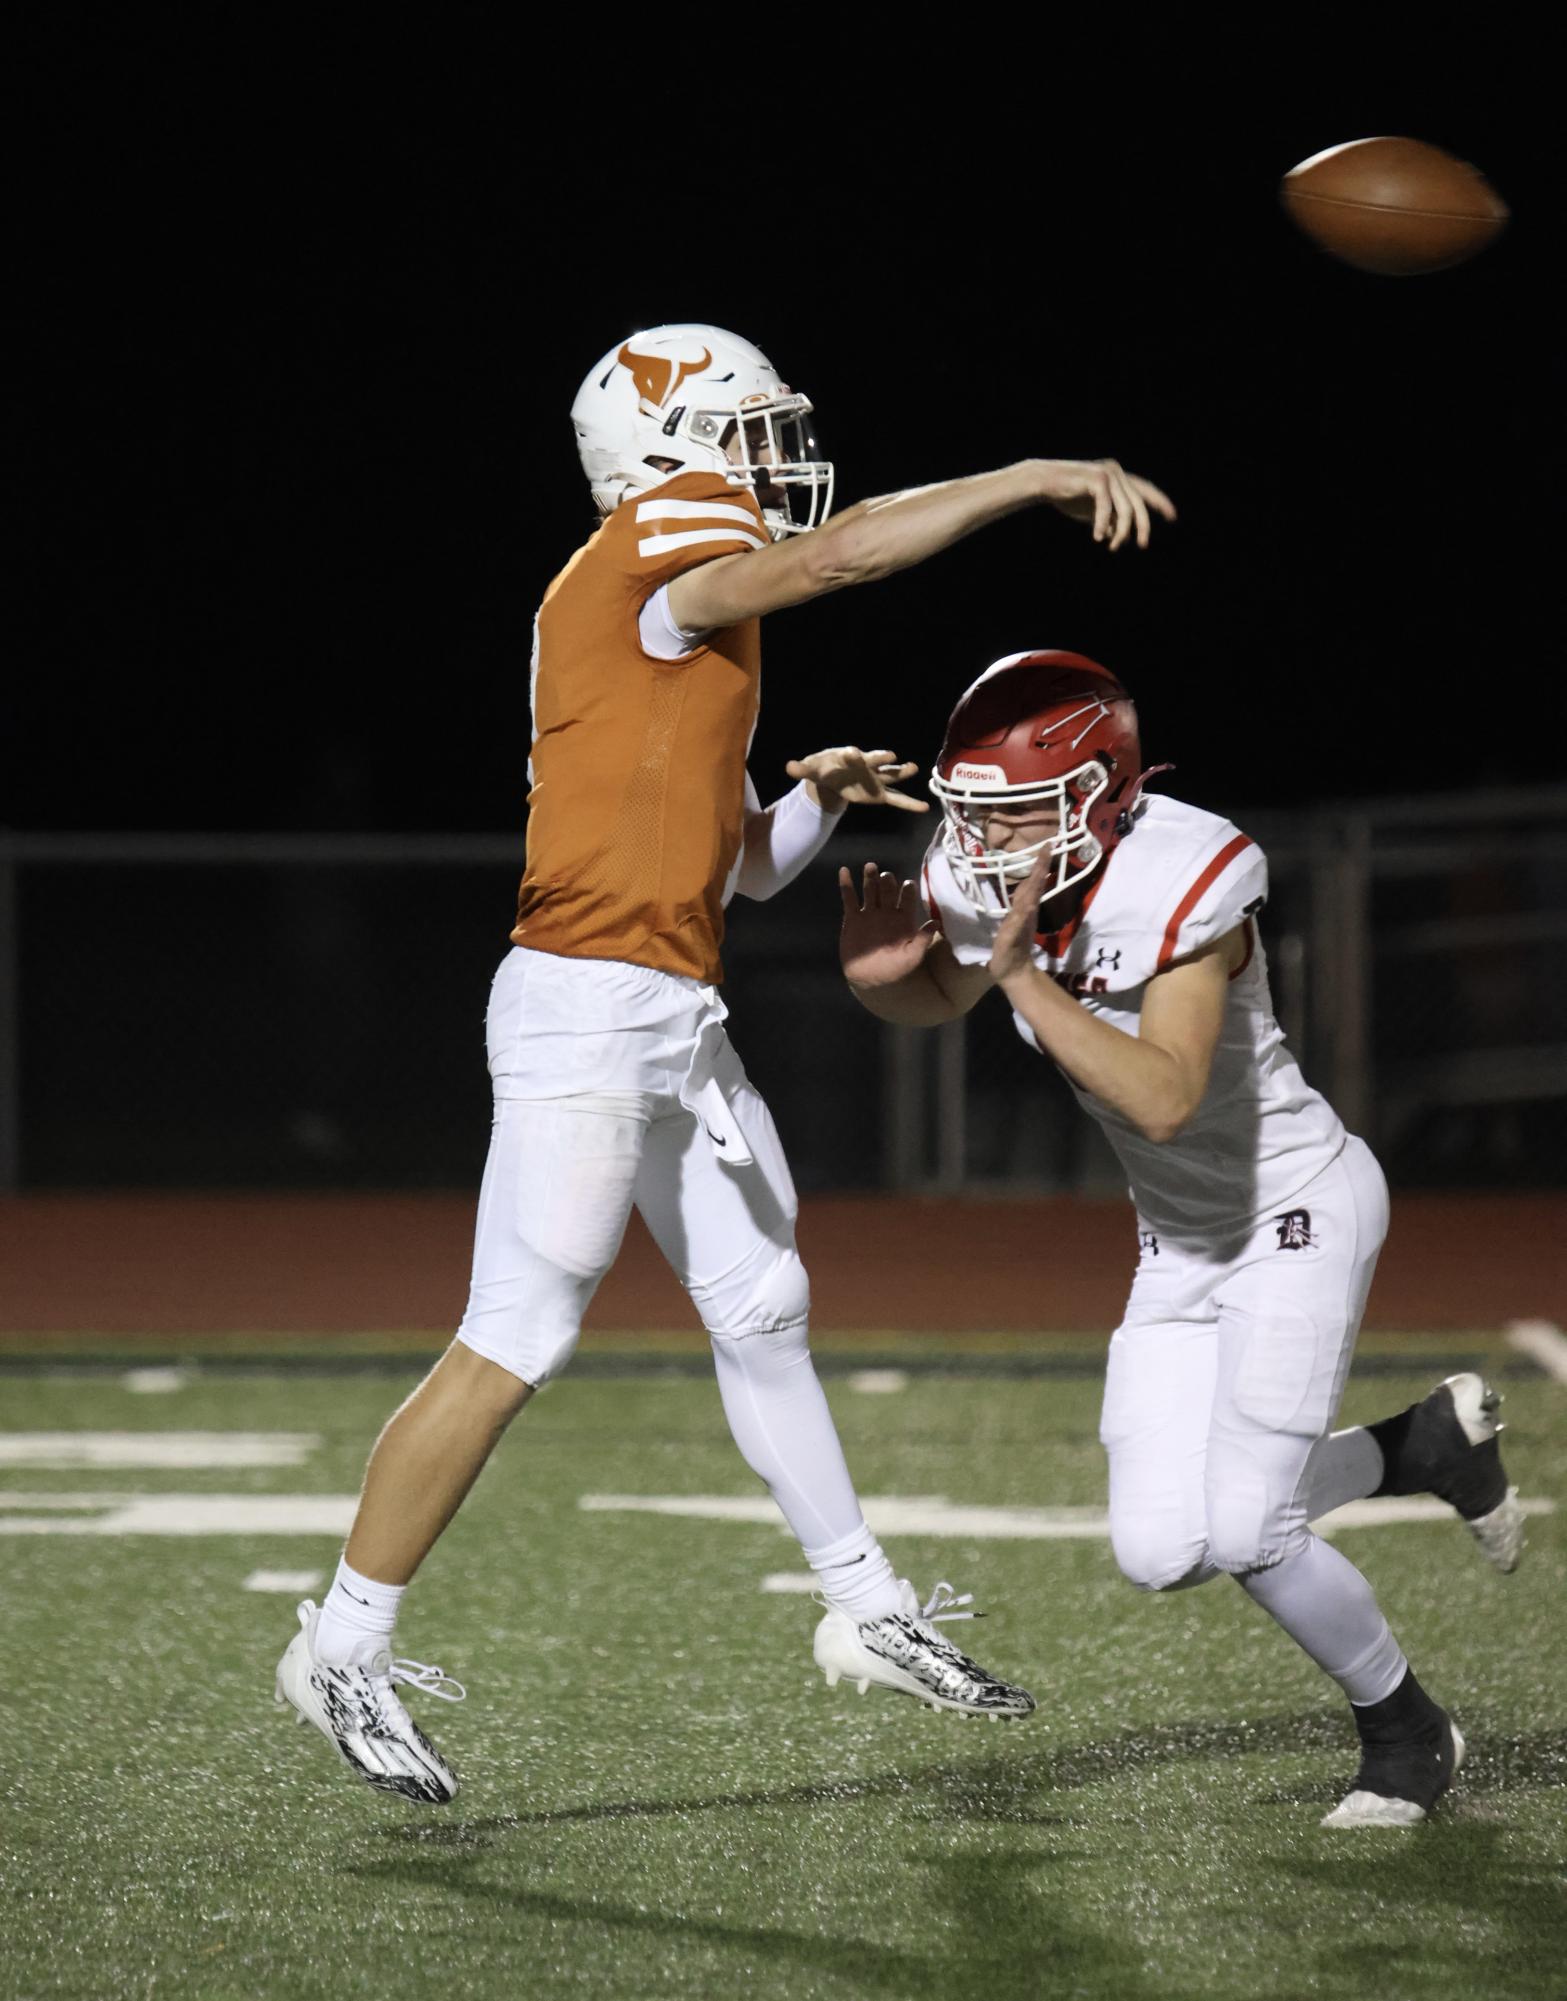 Christian Hiner (‘25) throws a pass while evading a tackle in Mead’s home game against the Demons. 